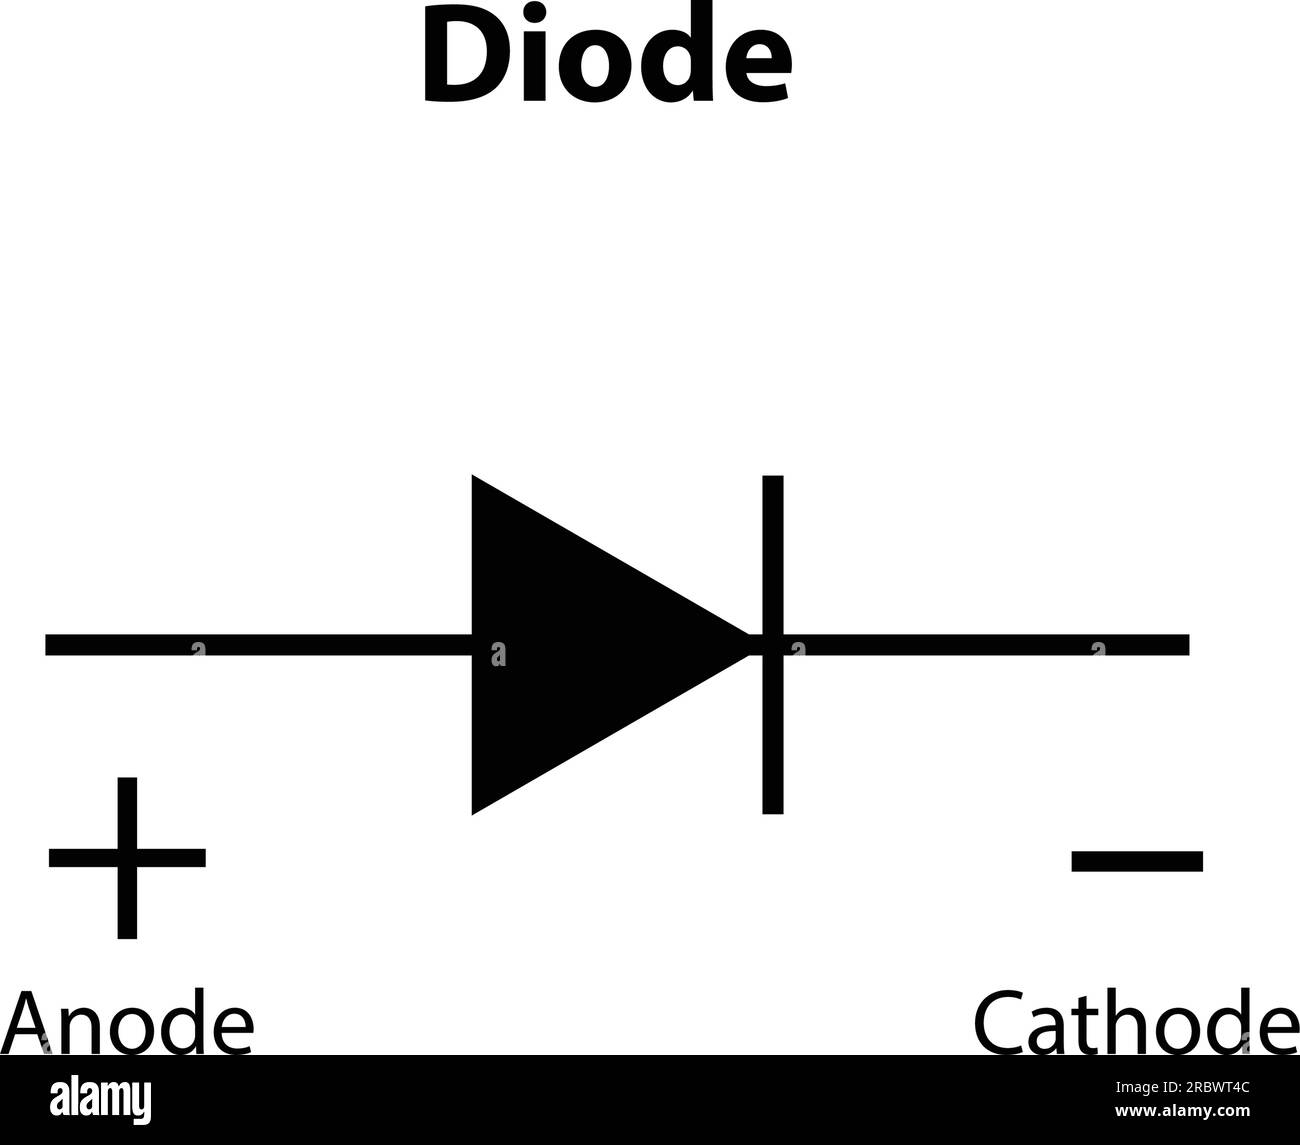 Diode. anode and cathode. electronic symbol of Illustration of basic circuit symbols. Electrical symbols, study content of physics students. Stock Vector